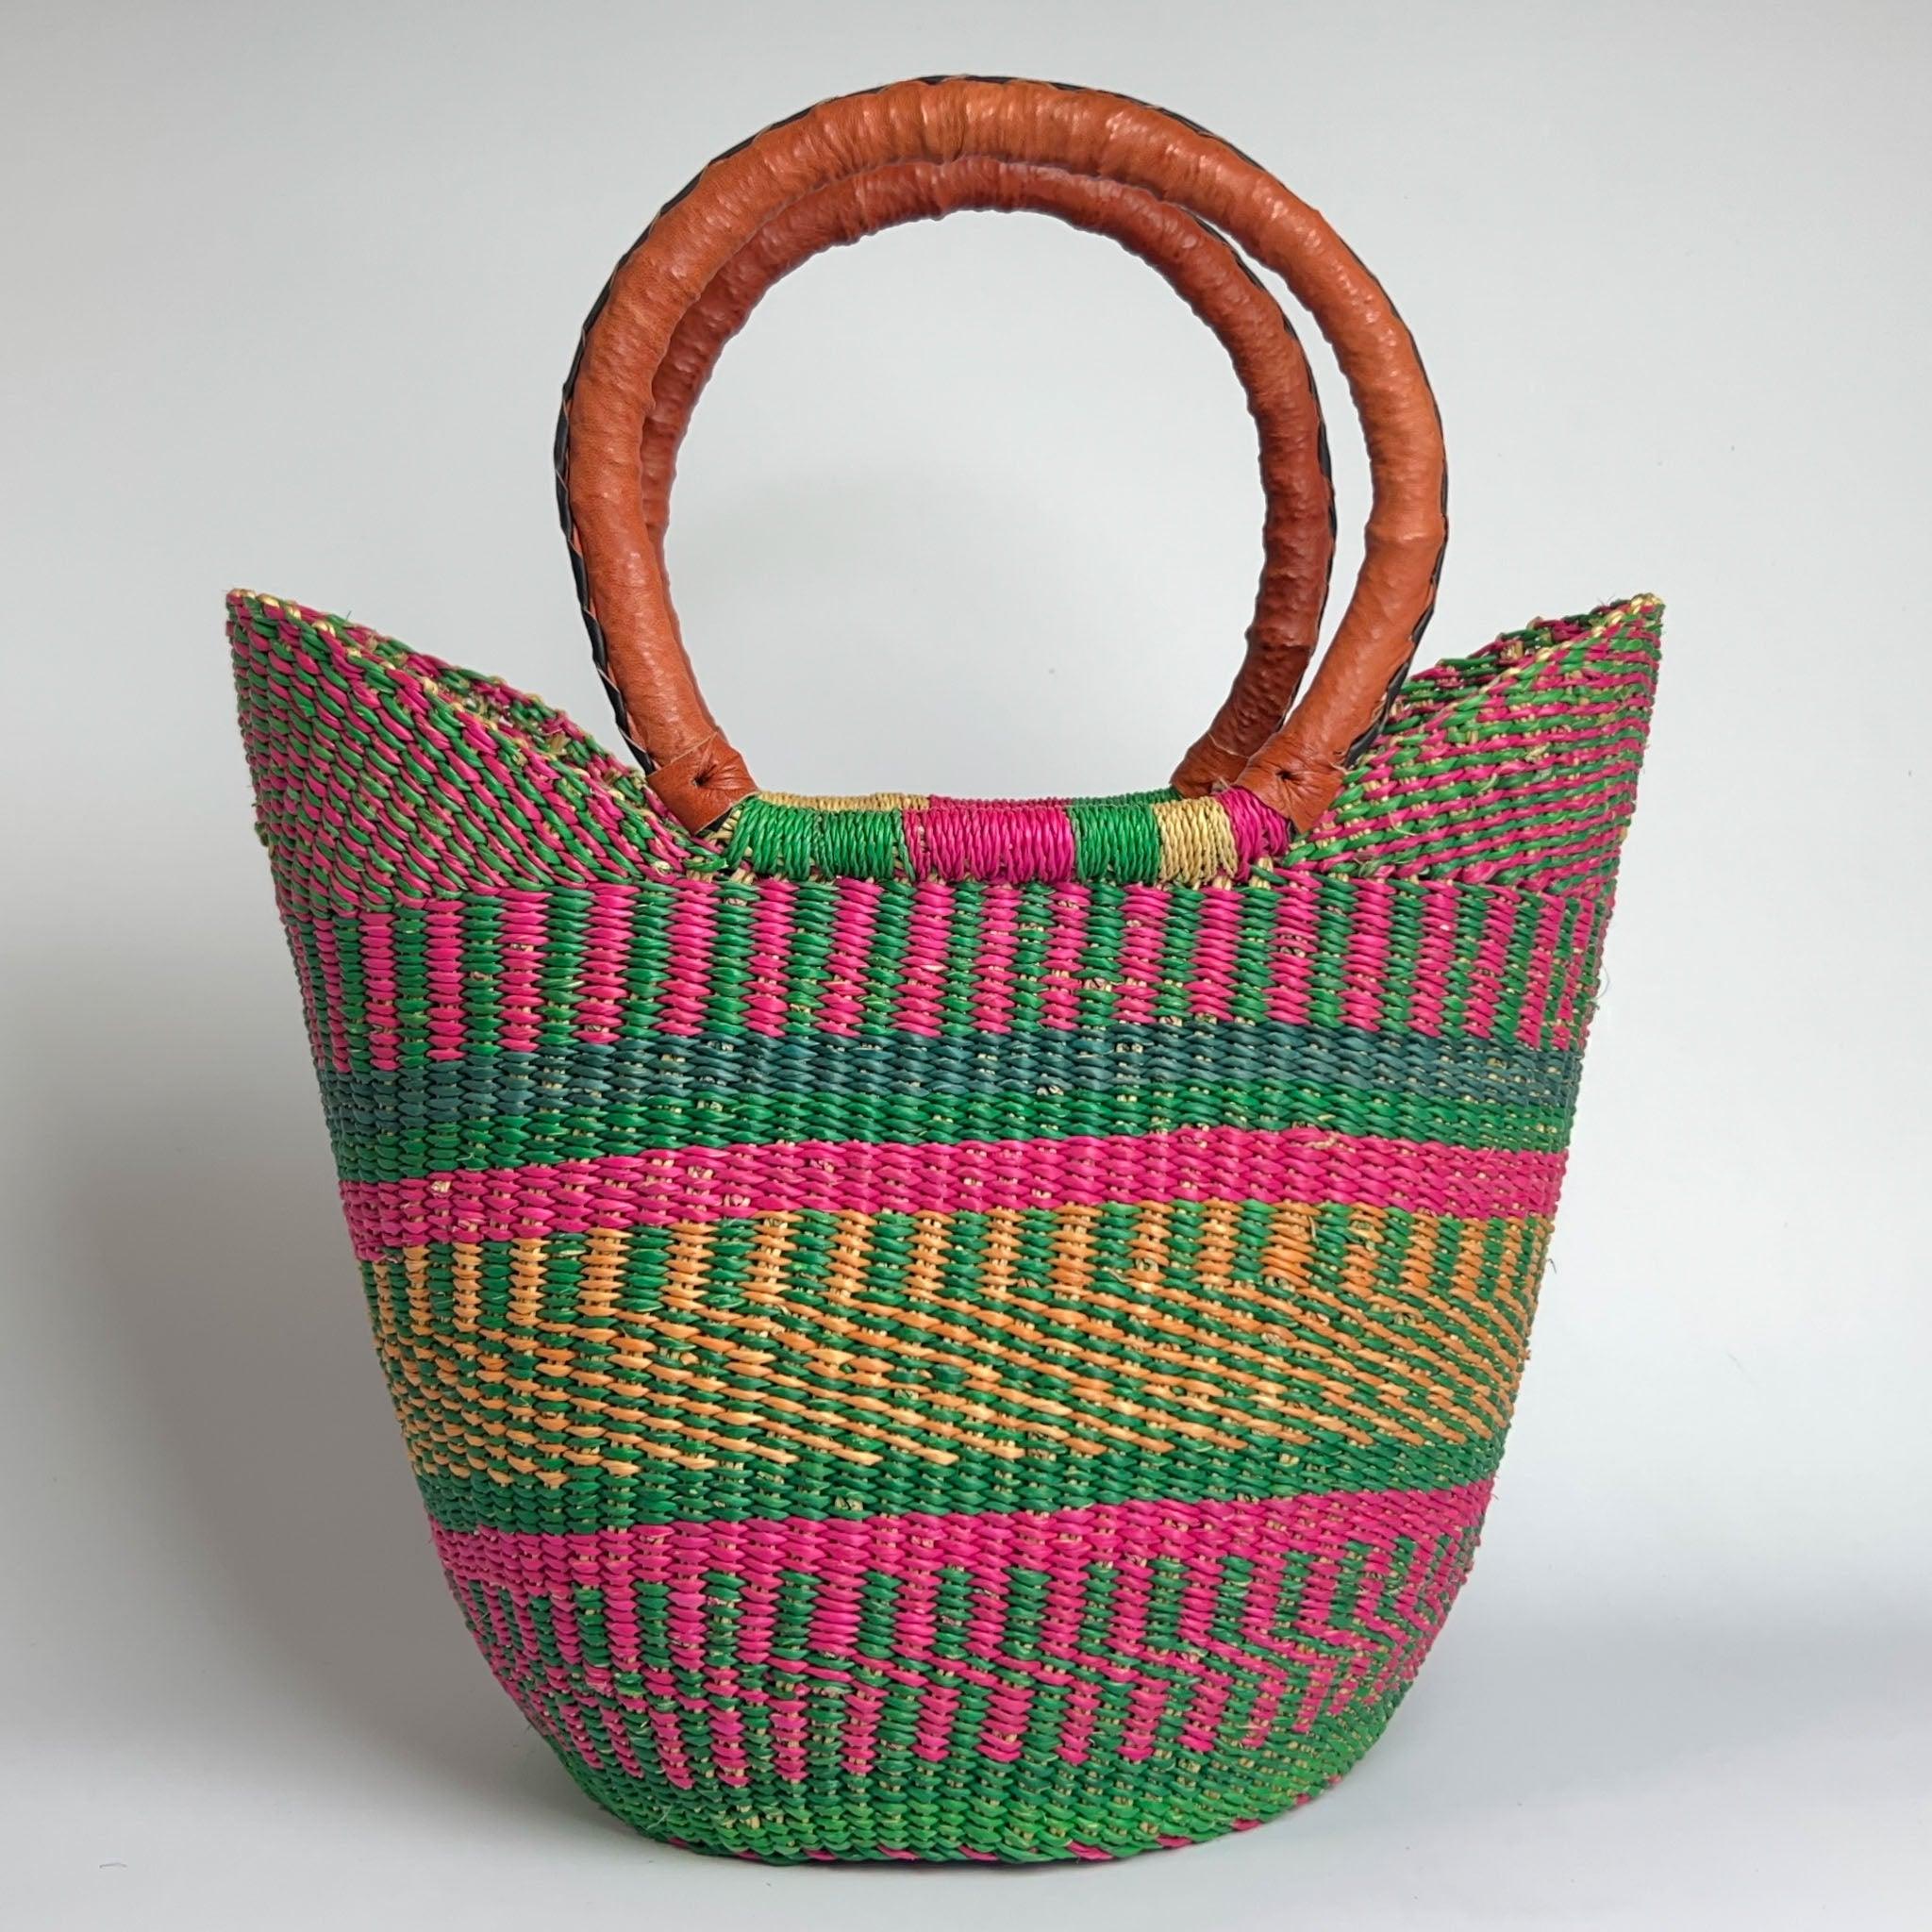 Summery African basket close-up showing off the vivid pink and fresh green colours and attractive leather handles.